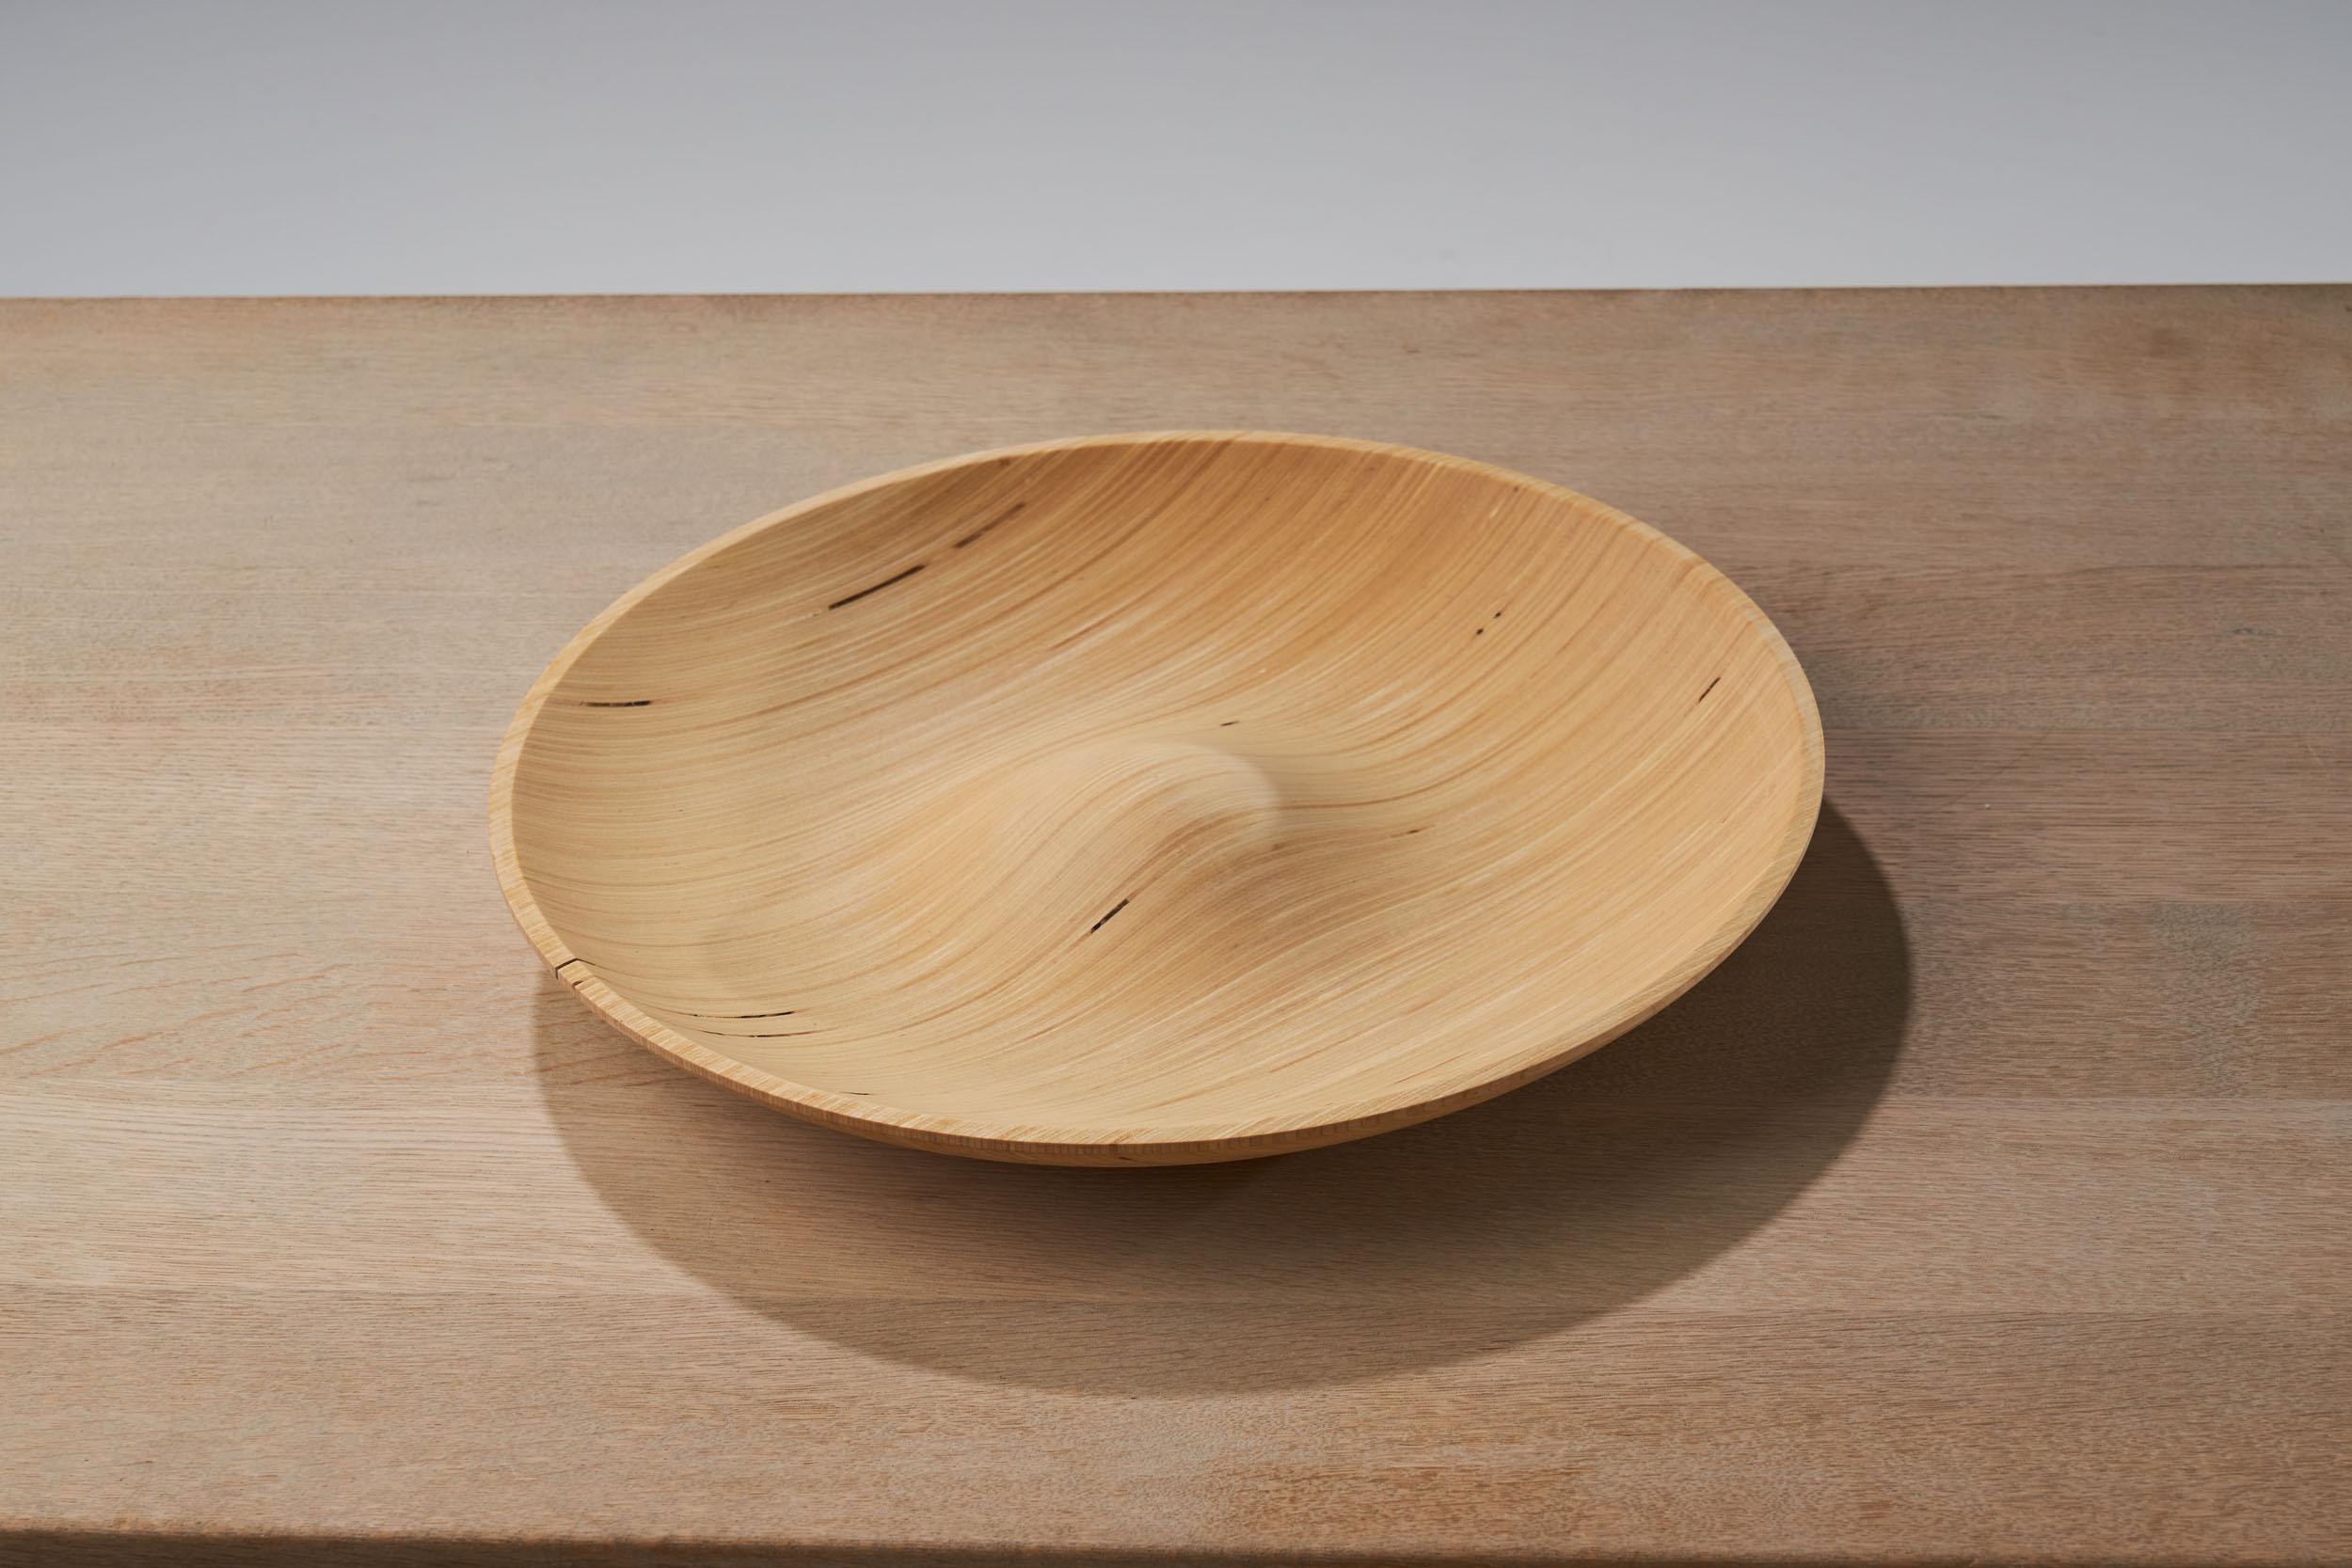 The design of products can relay various insights about the society and culture in which they have been produced. This set of four plates by Finnish industrial designer Antti Nurmesniemi is a great example of this. 

Finnish design is appreciated